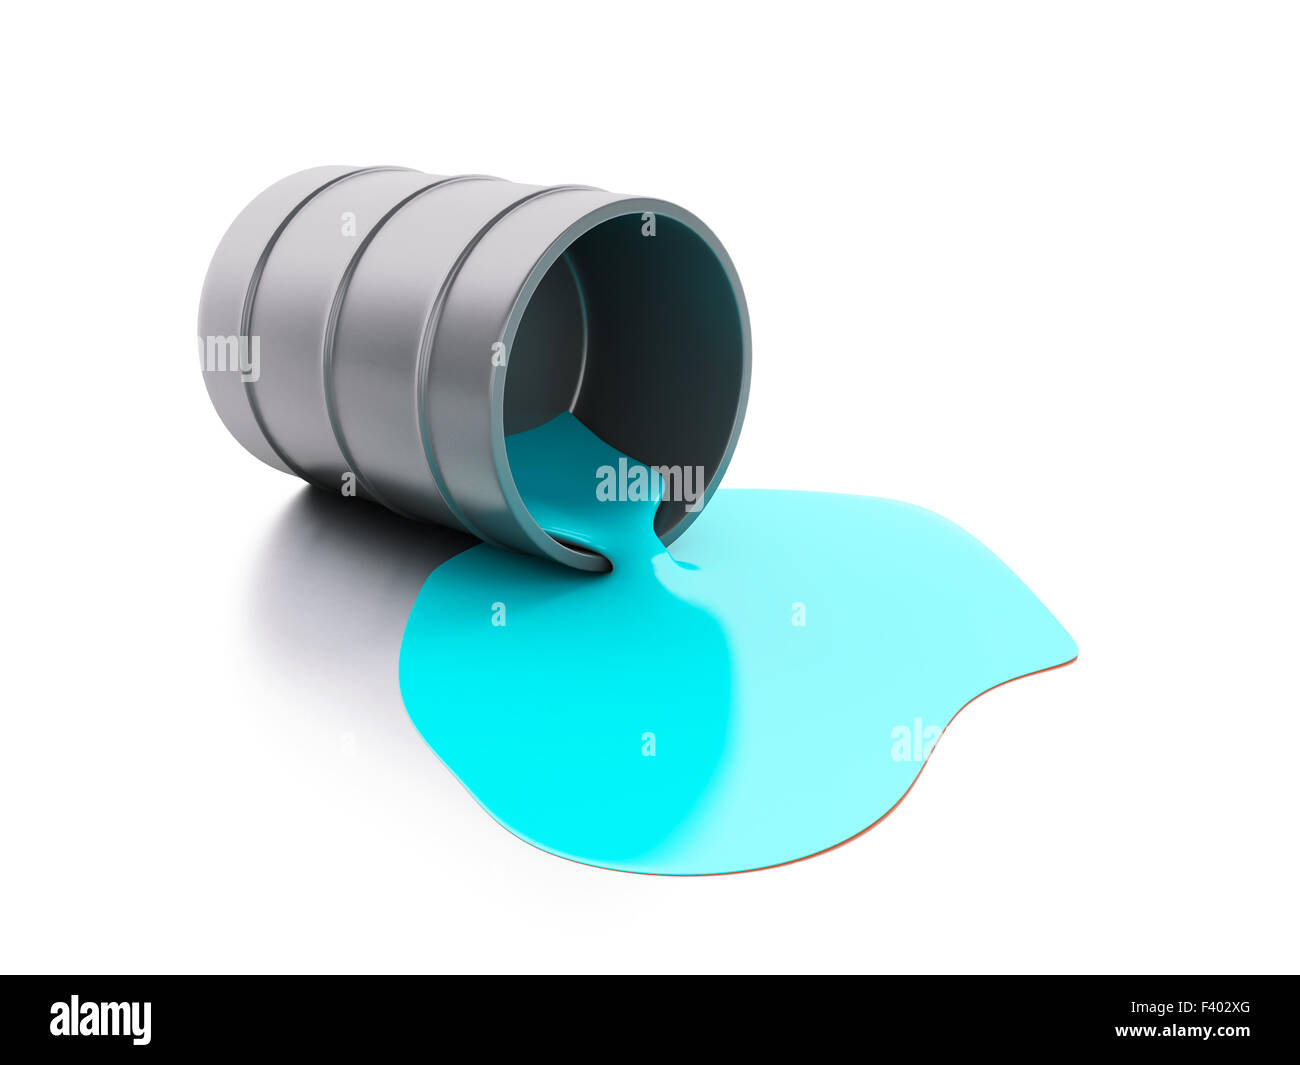 3d Illustration Of Yellow Paint Spilled From Metal Cans On White